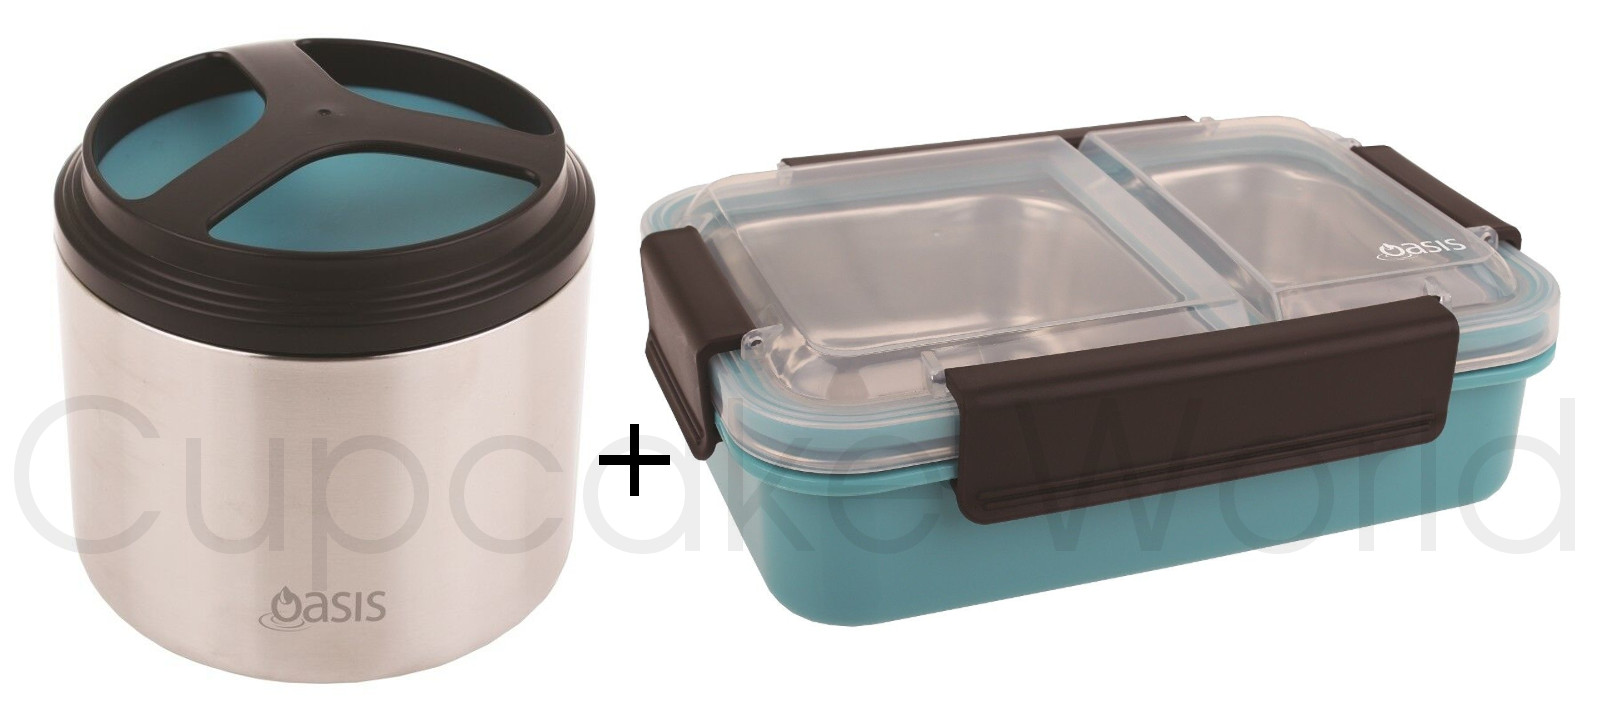 BLUE OASIS STAINLESS STEEL 1L VACUUM FOOD CONTAINER & LUNCH BOX!